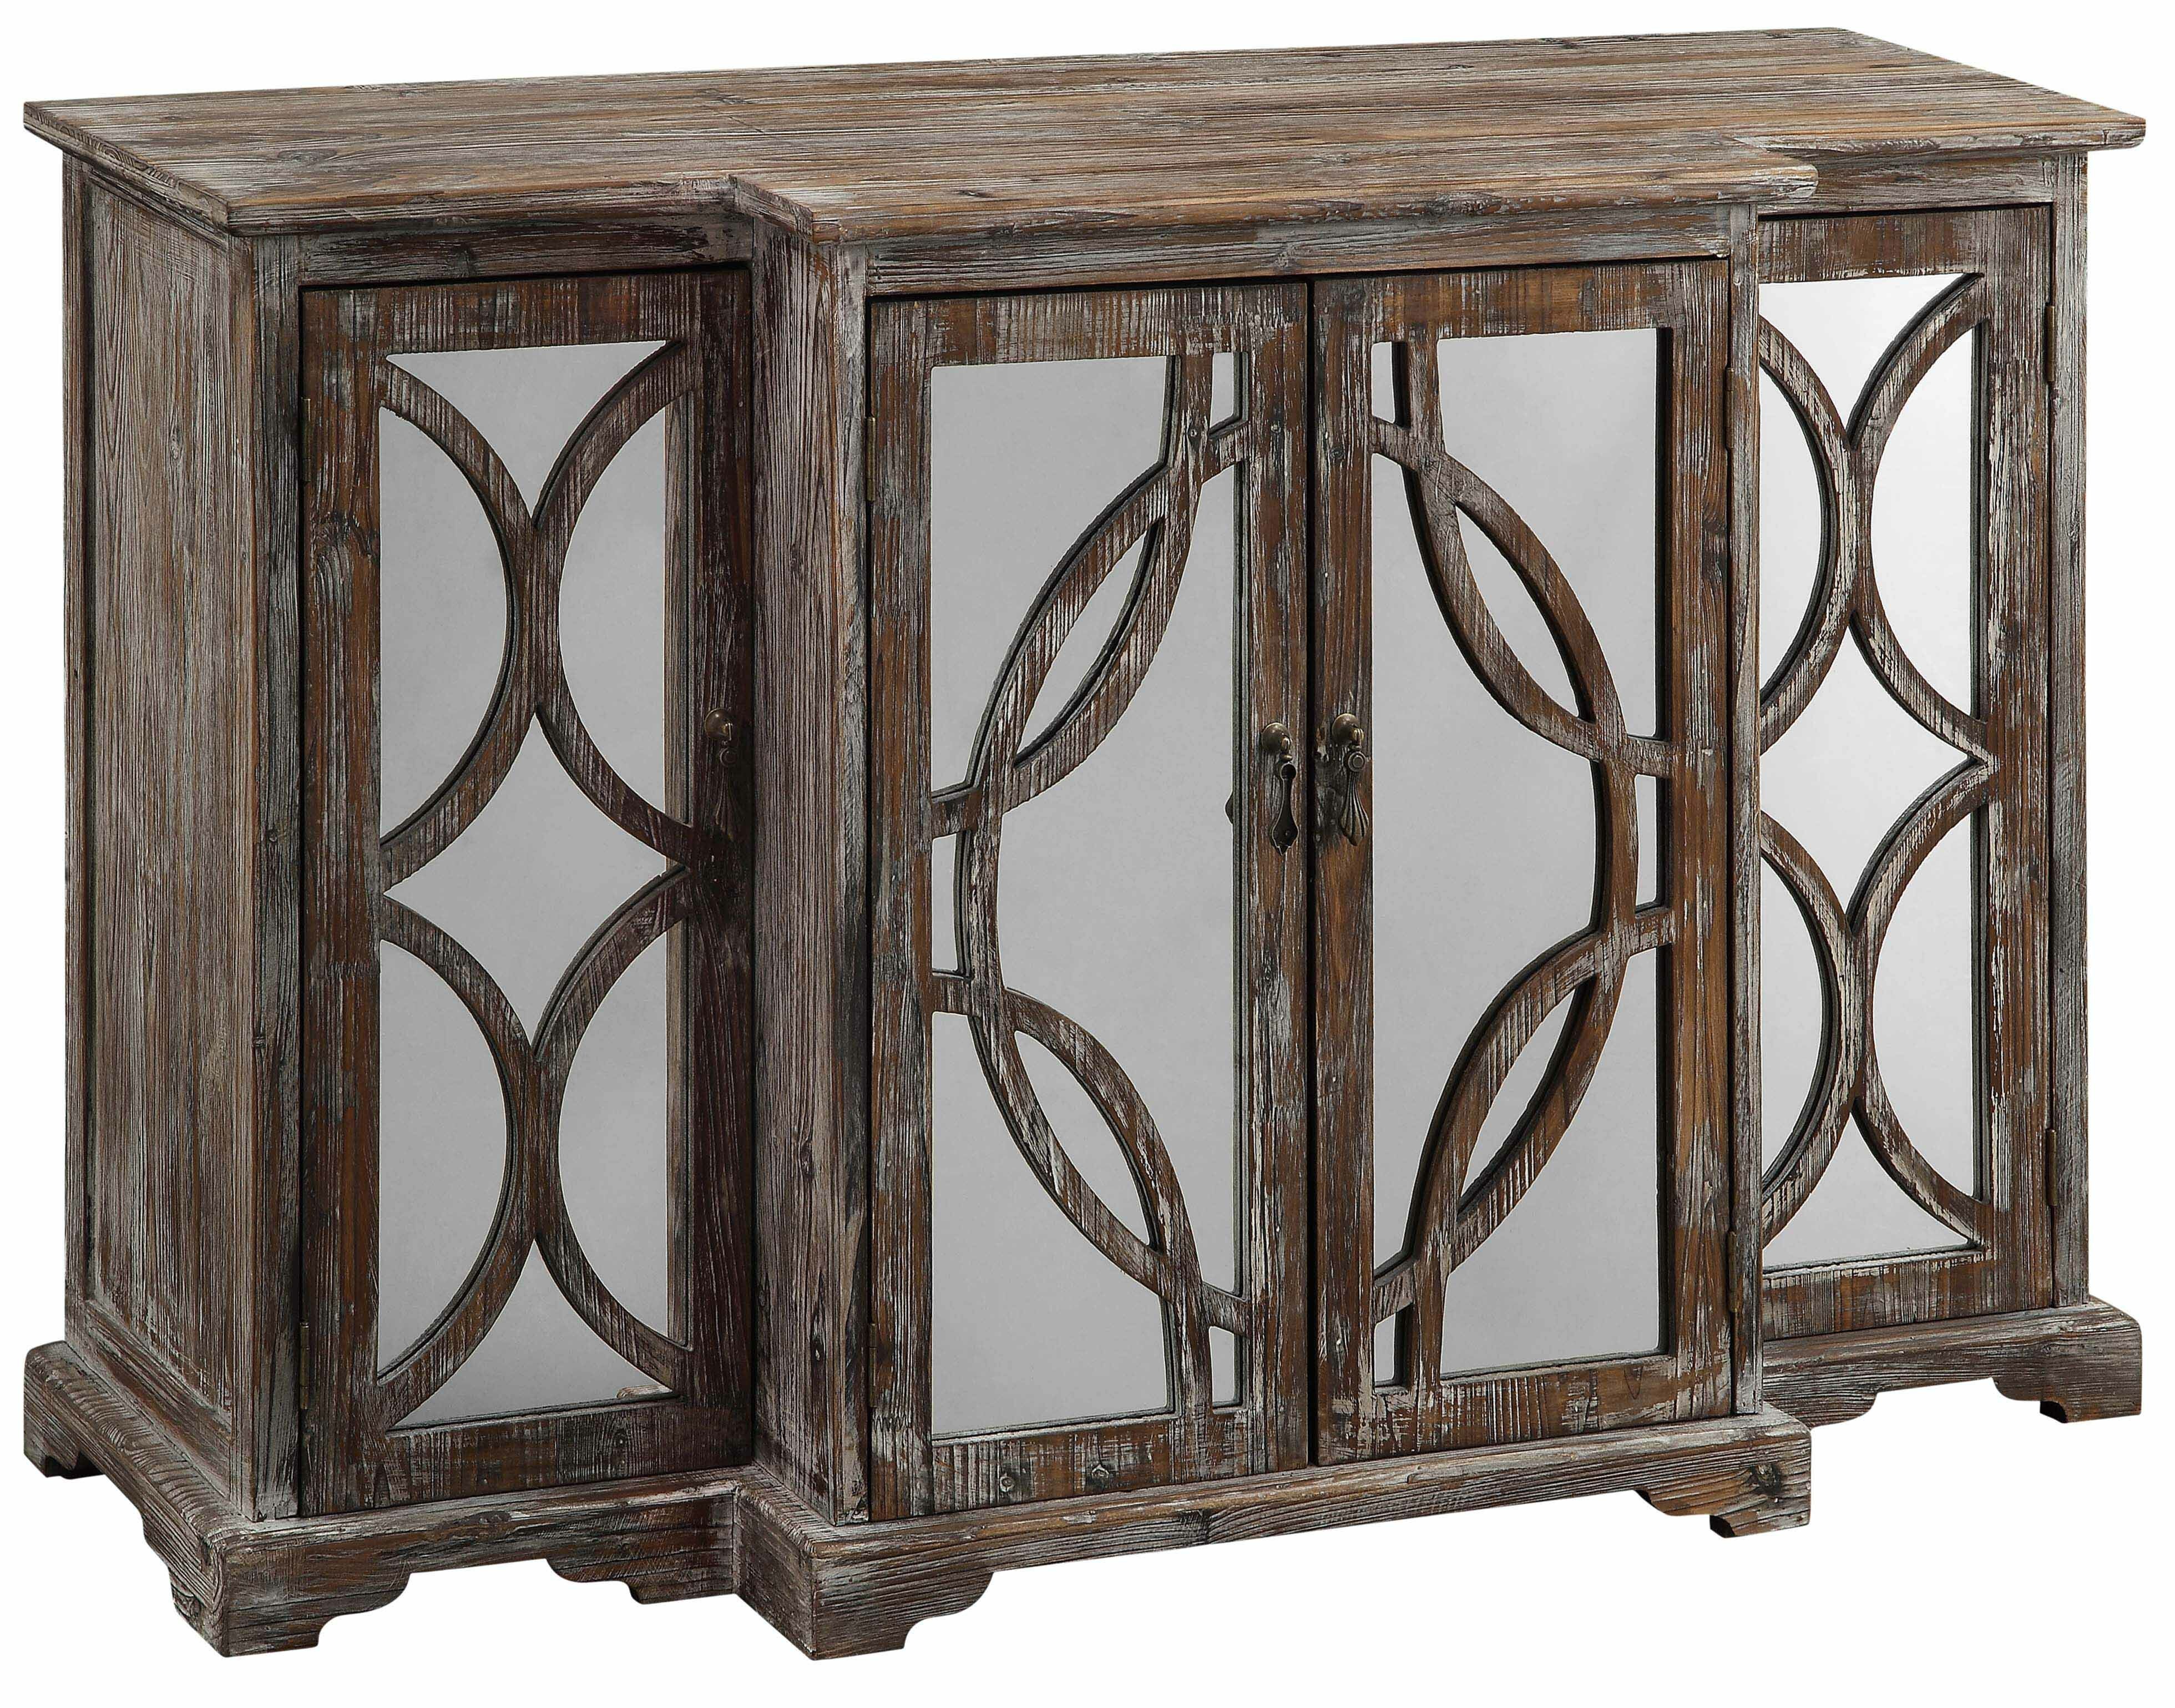 Limeuil Sideboard Intended For Ellenton Sideboards (View 12 of 30)